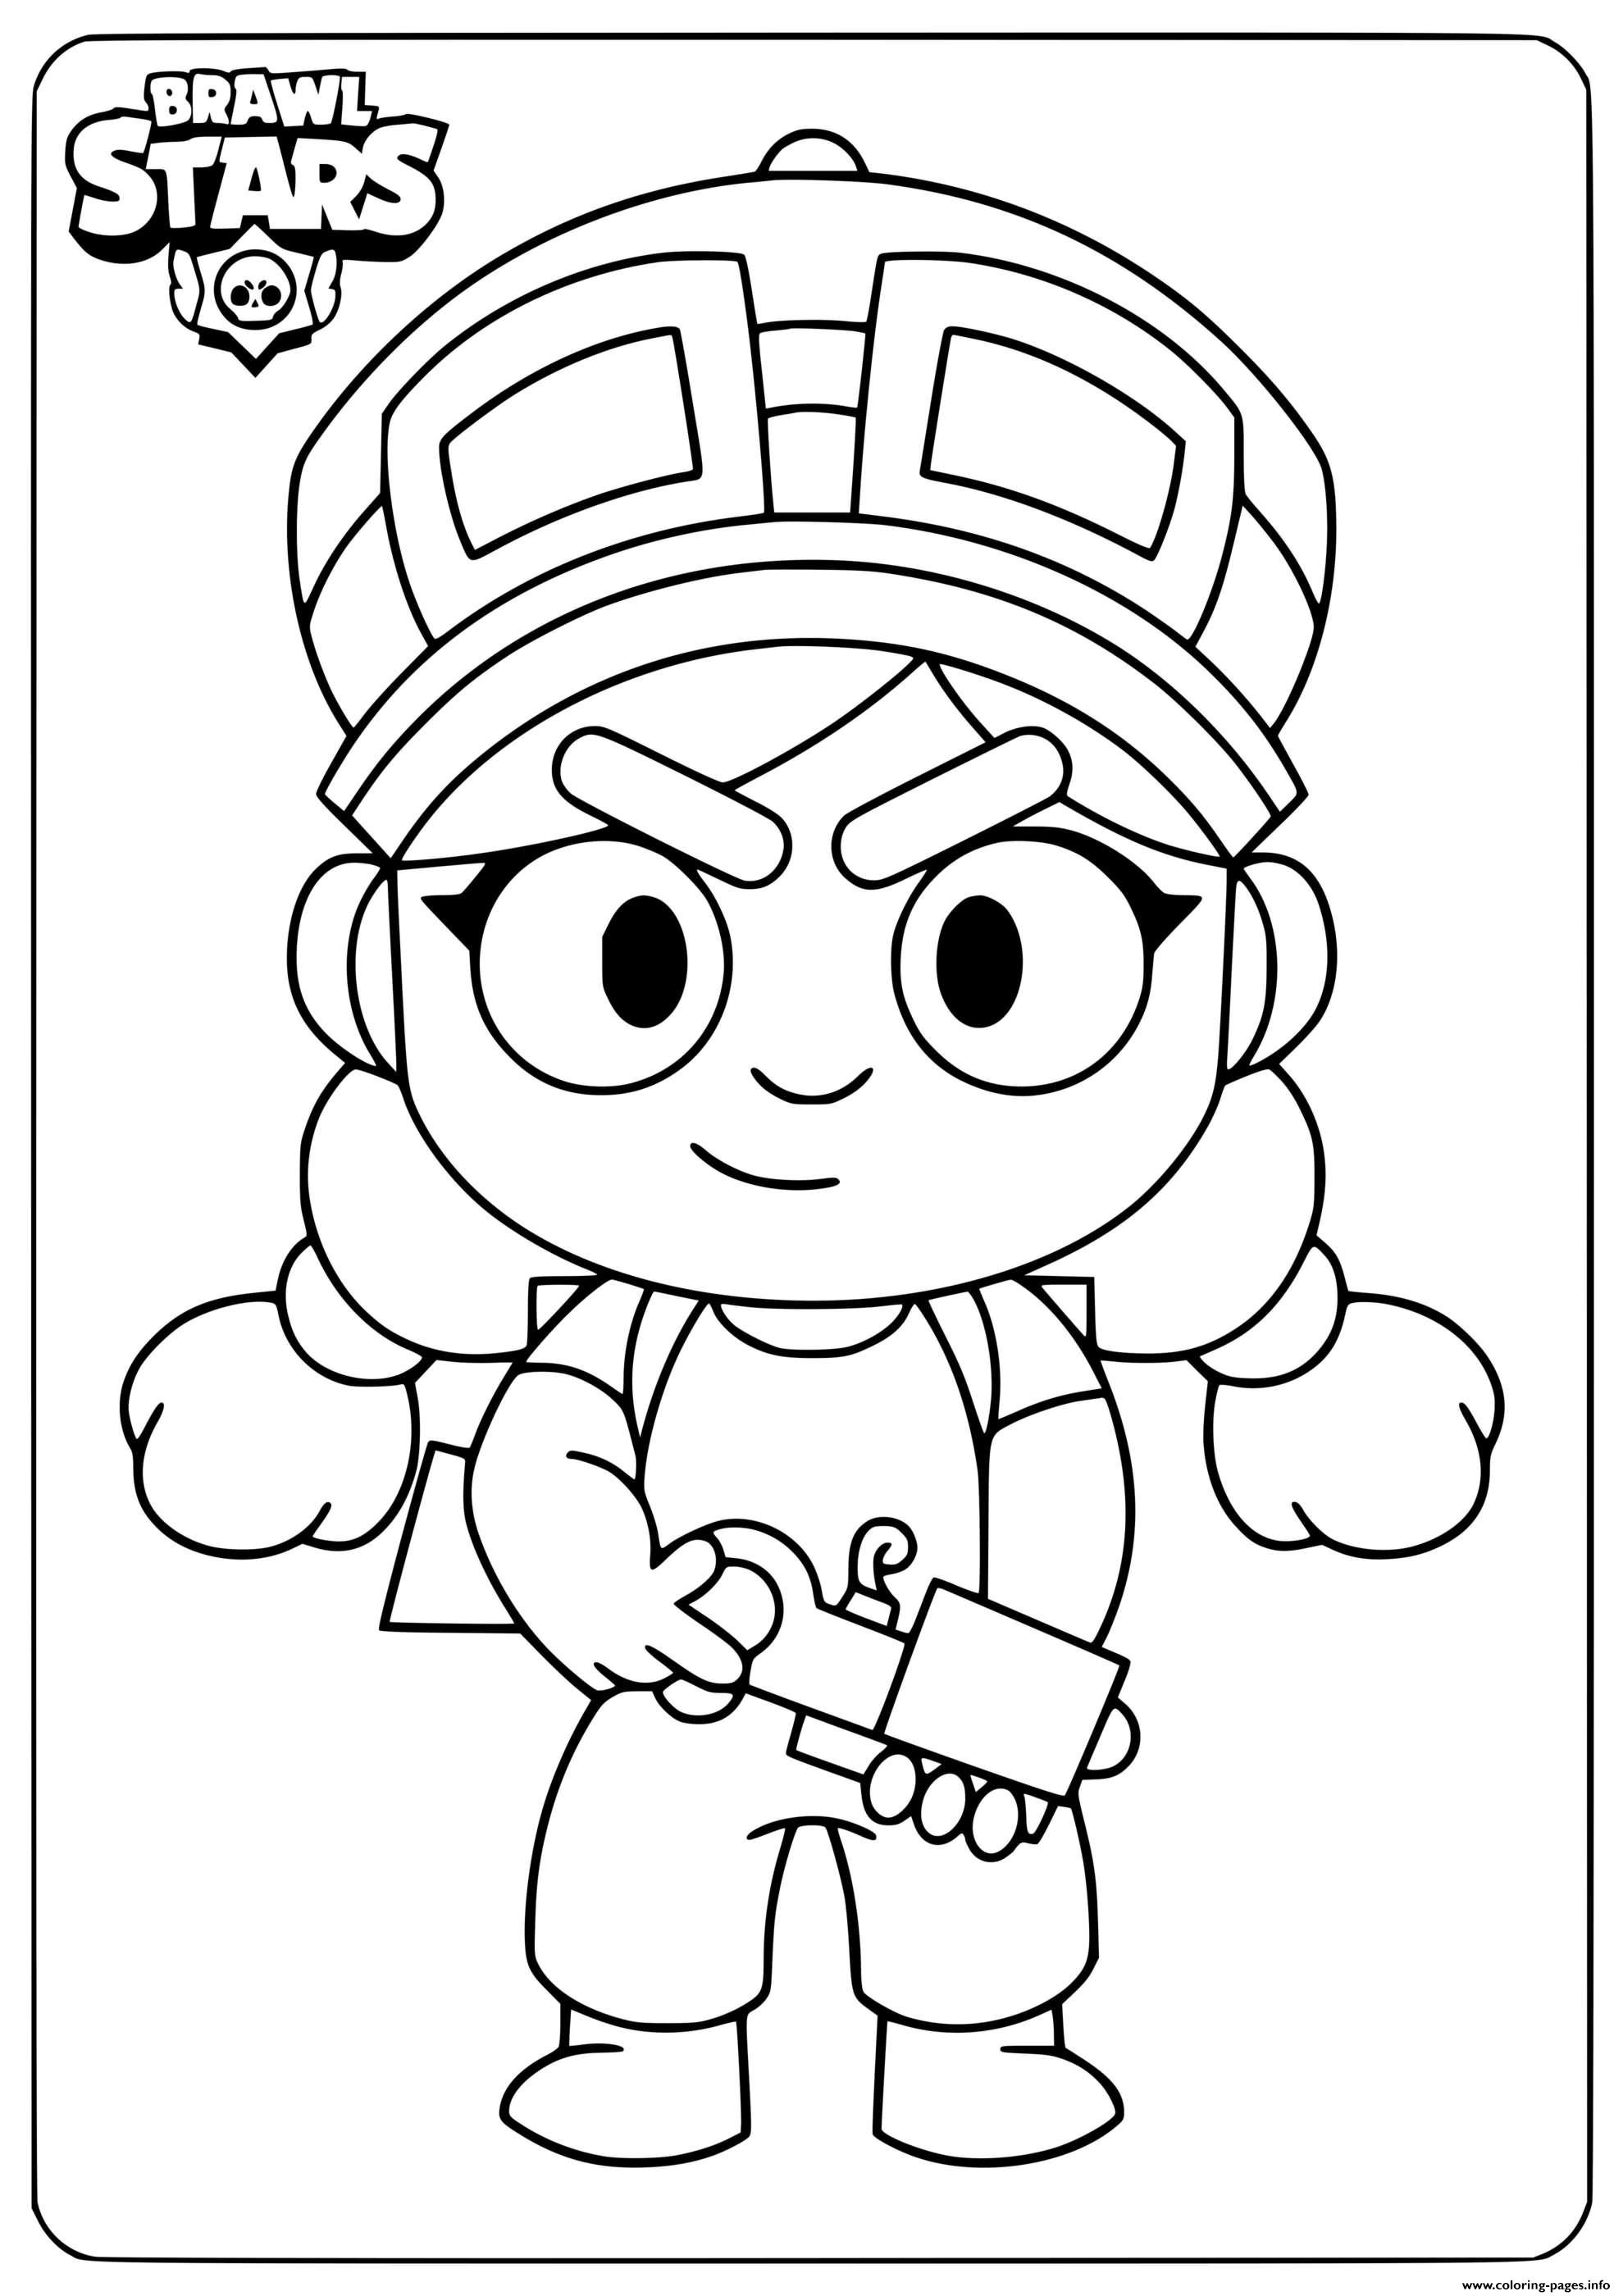 Brawl Stars Jessie Coloring Pages Printable - carl brawl stars coloring pages